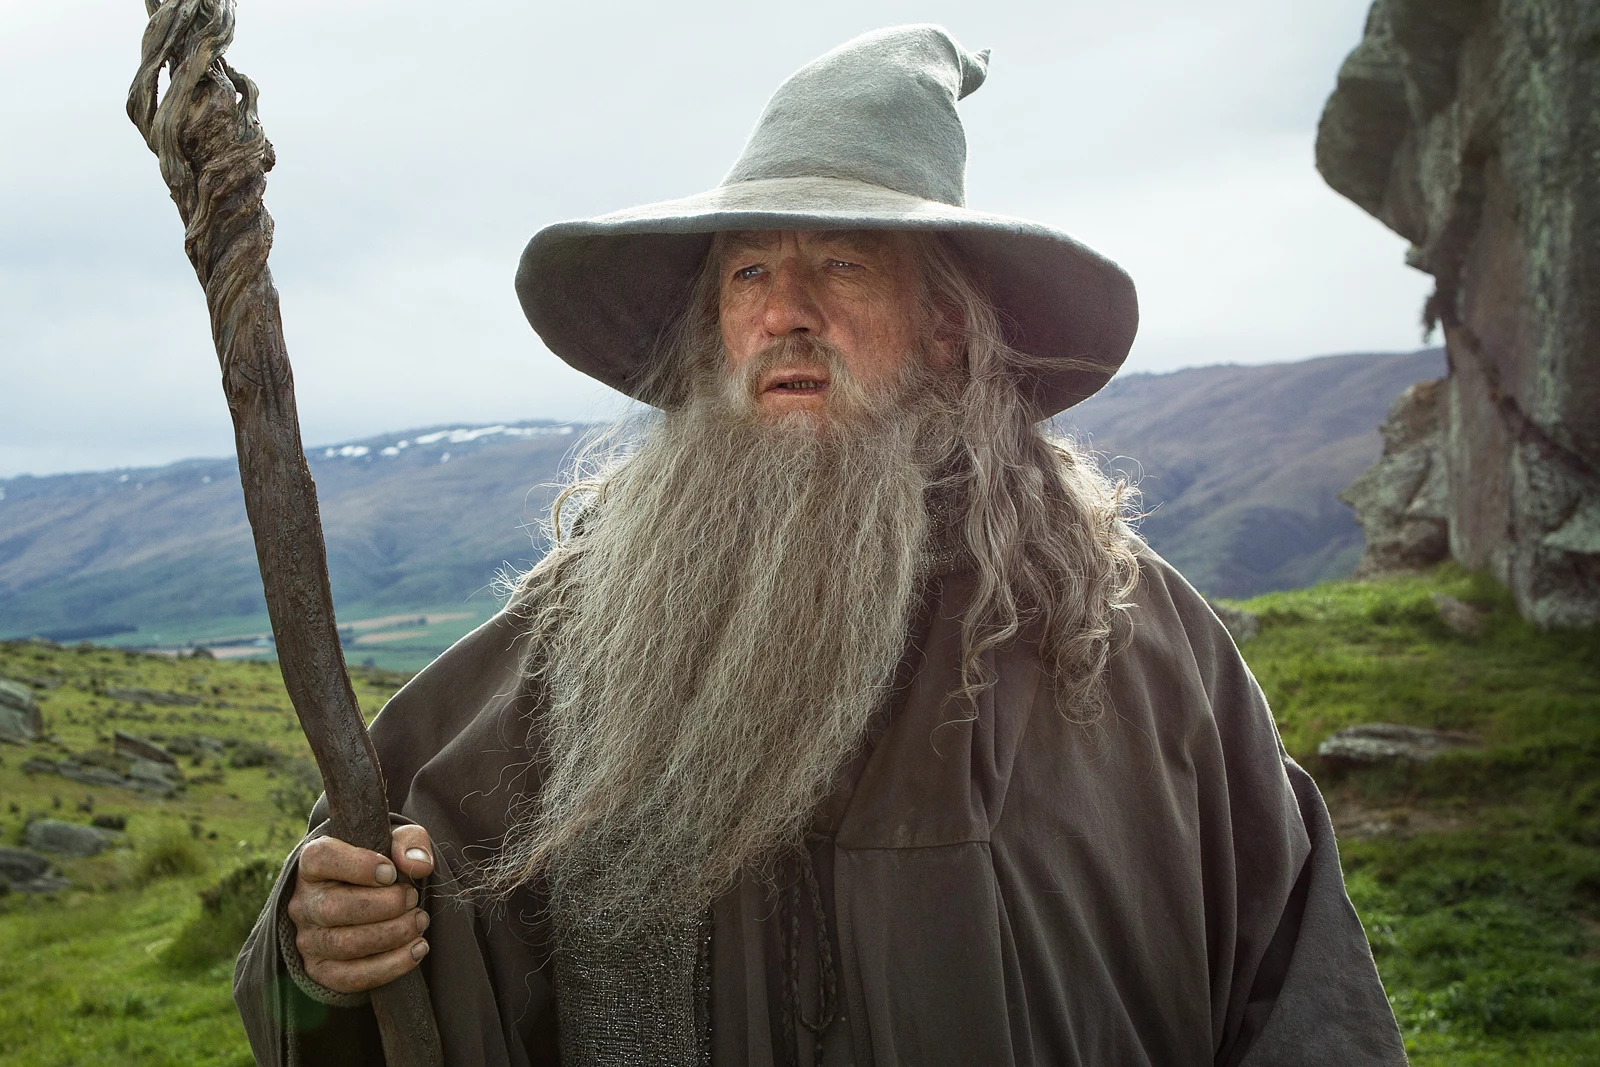 Ian McKellen Open to Appearing in Amazon's 'Lord of the Rings'